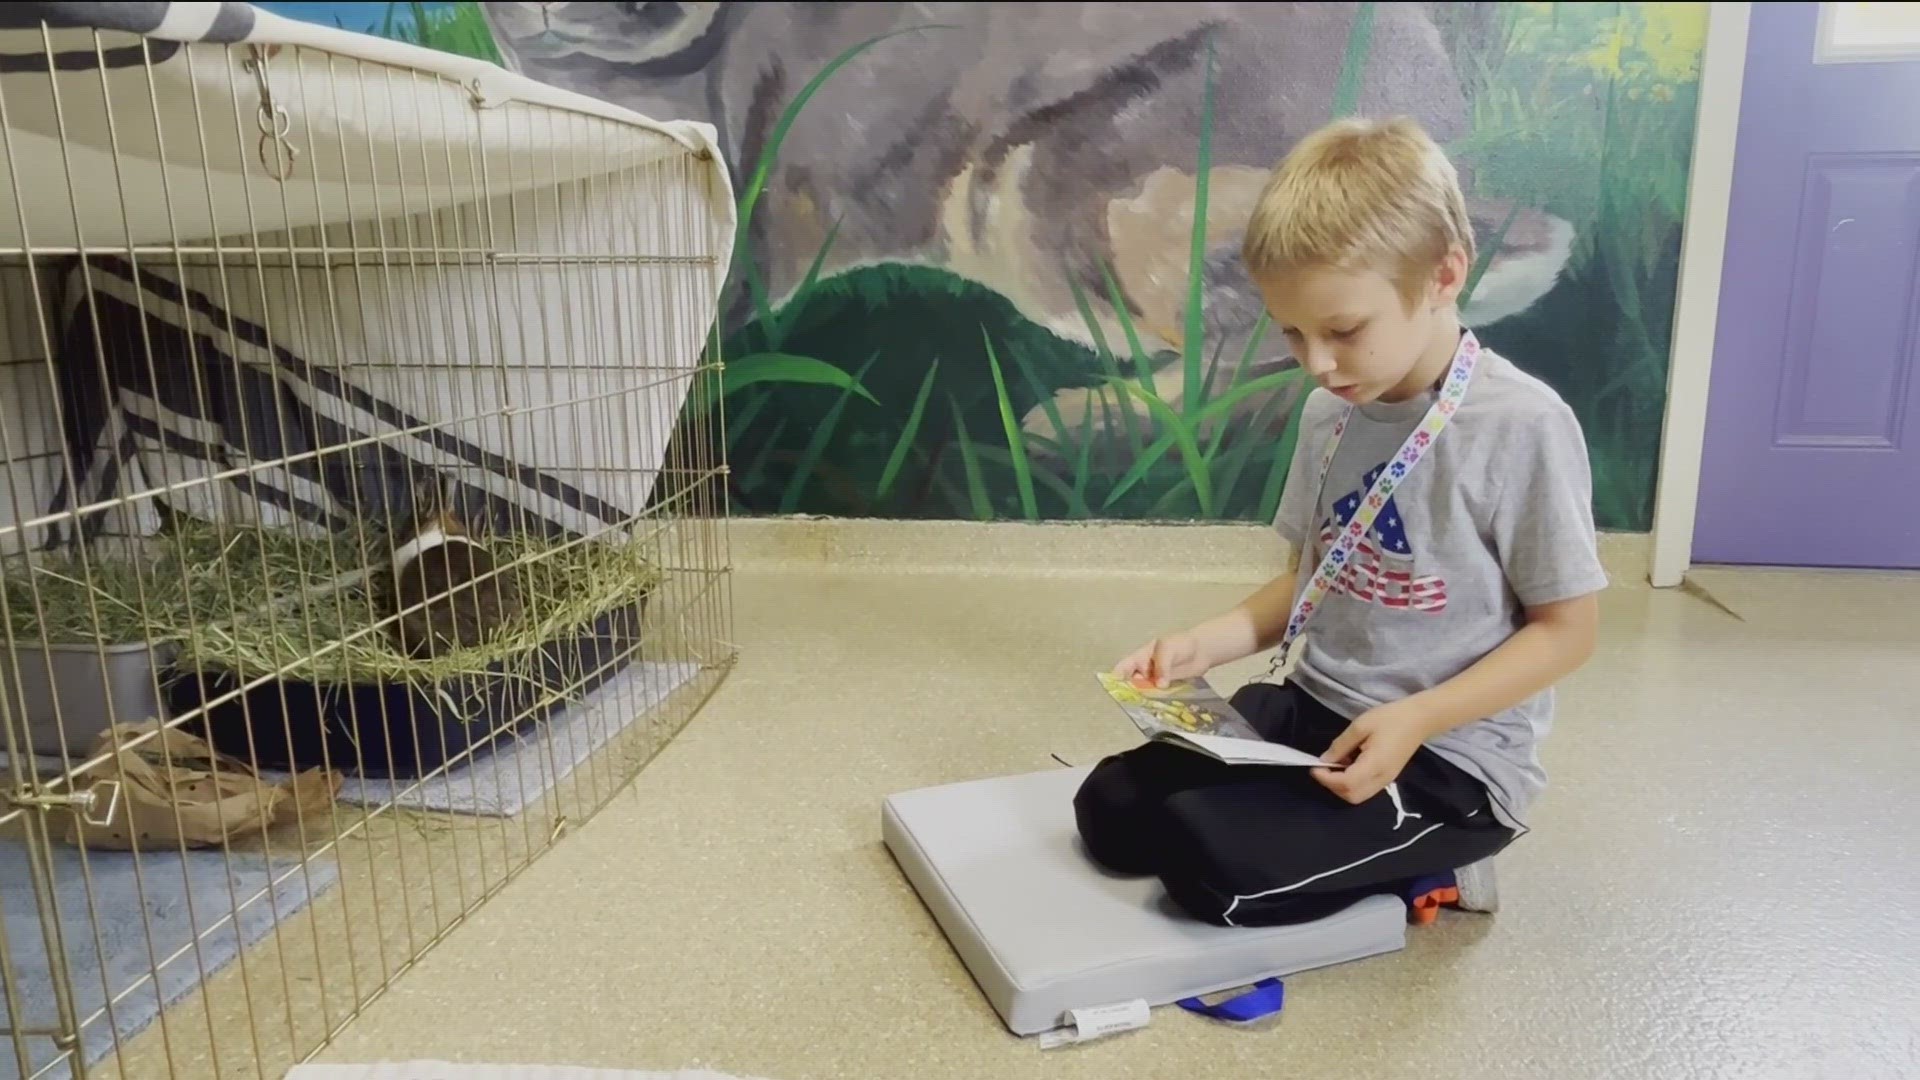 In the Happy Tales Reading Program, once a month kids ages 6-12 can come to the shelter and read books to adoptable cats, dogs and even rabbits.